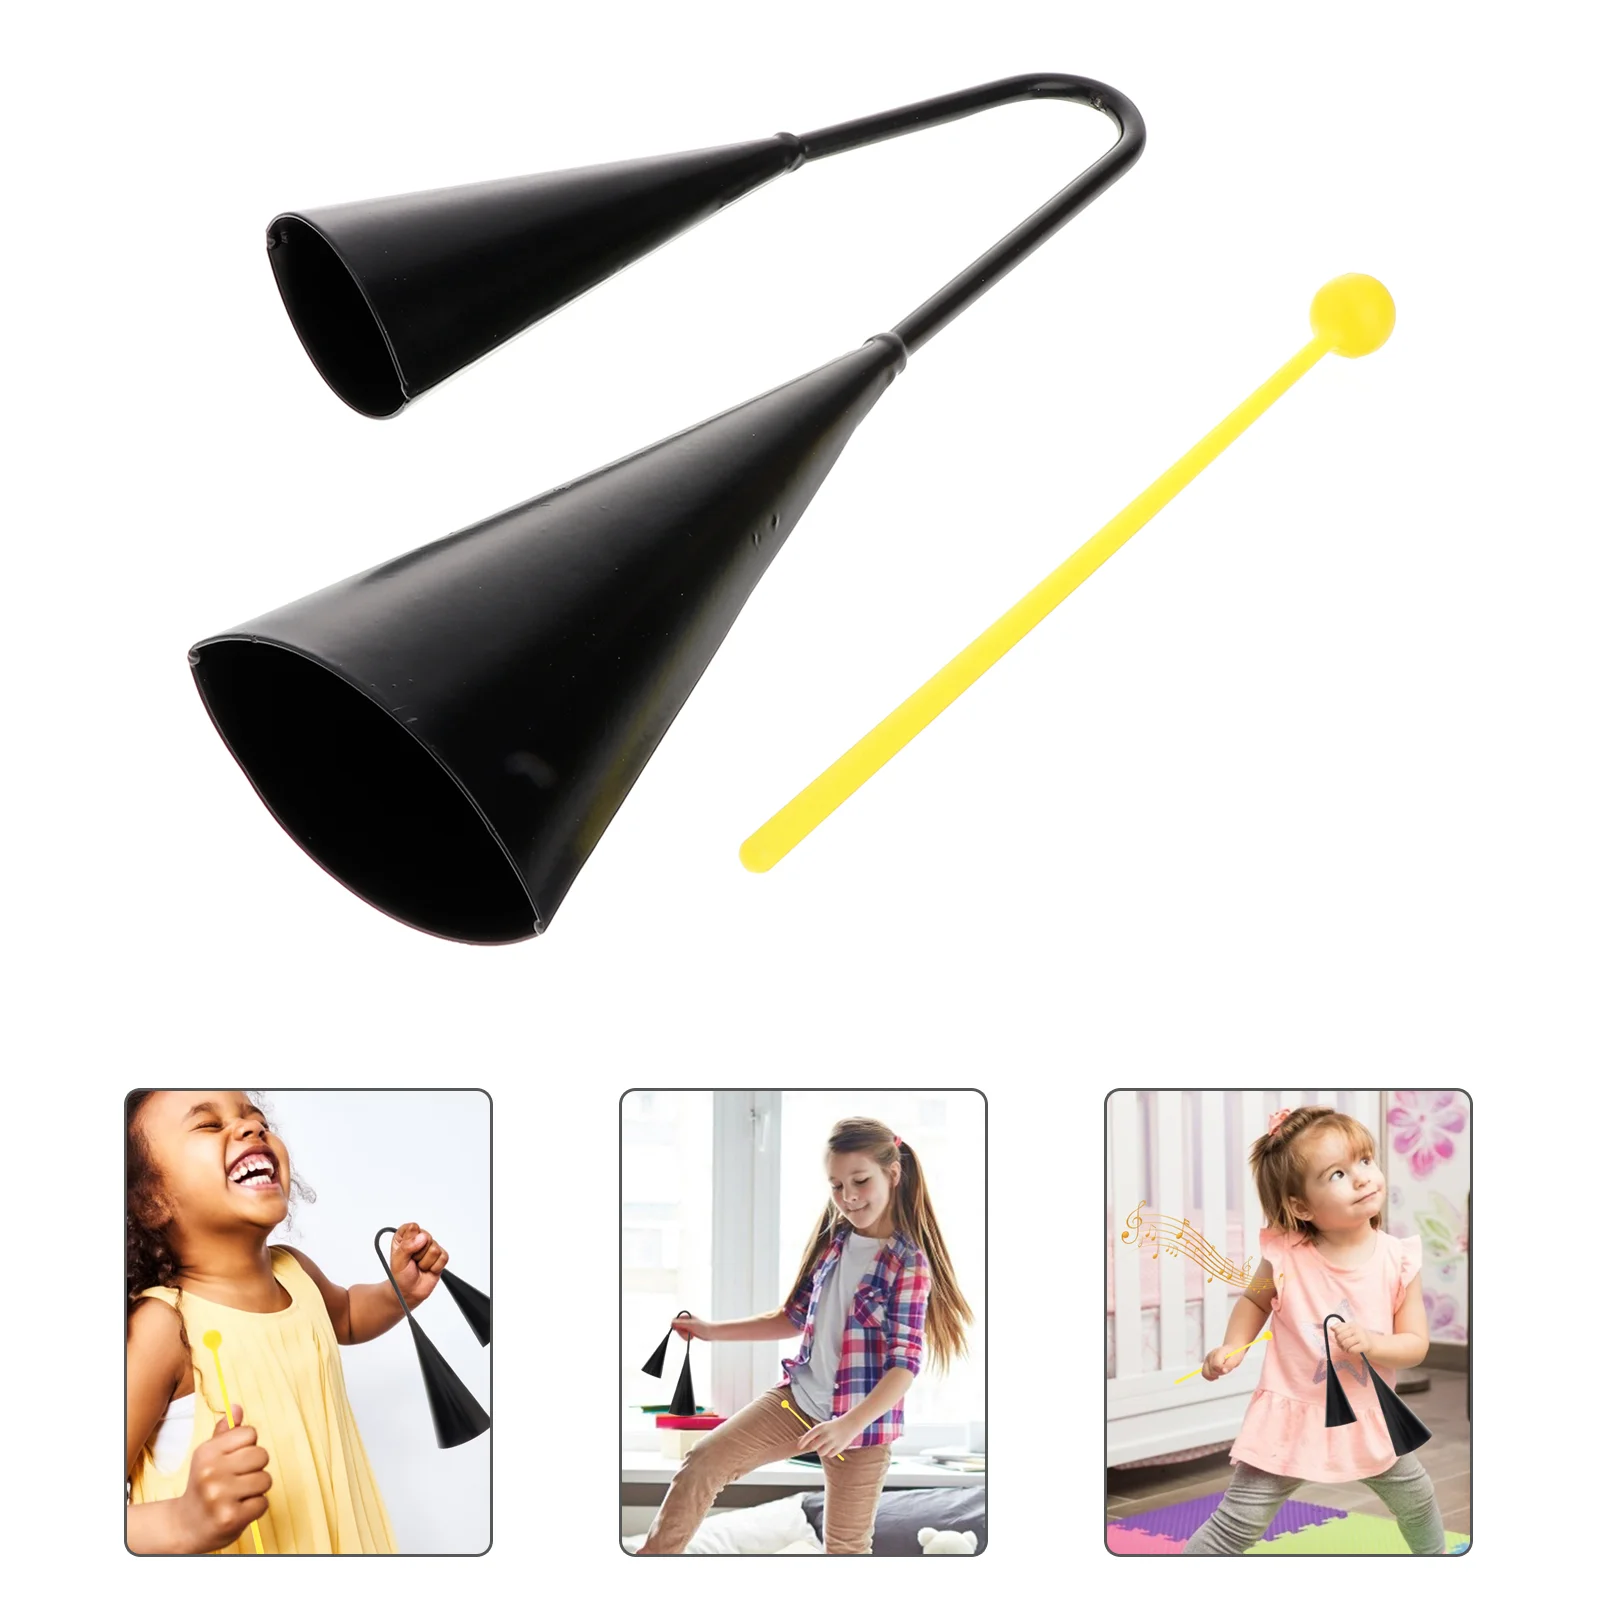 

Cowbell Metal Material Double Heads Durable Calling Bell Black Musical Instrument for Outdoor Class Enlightenment Music Parts